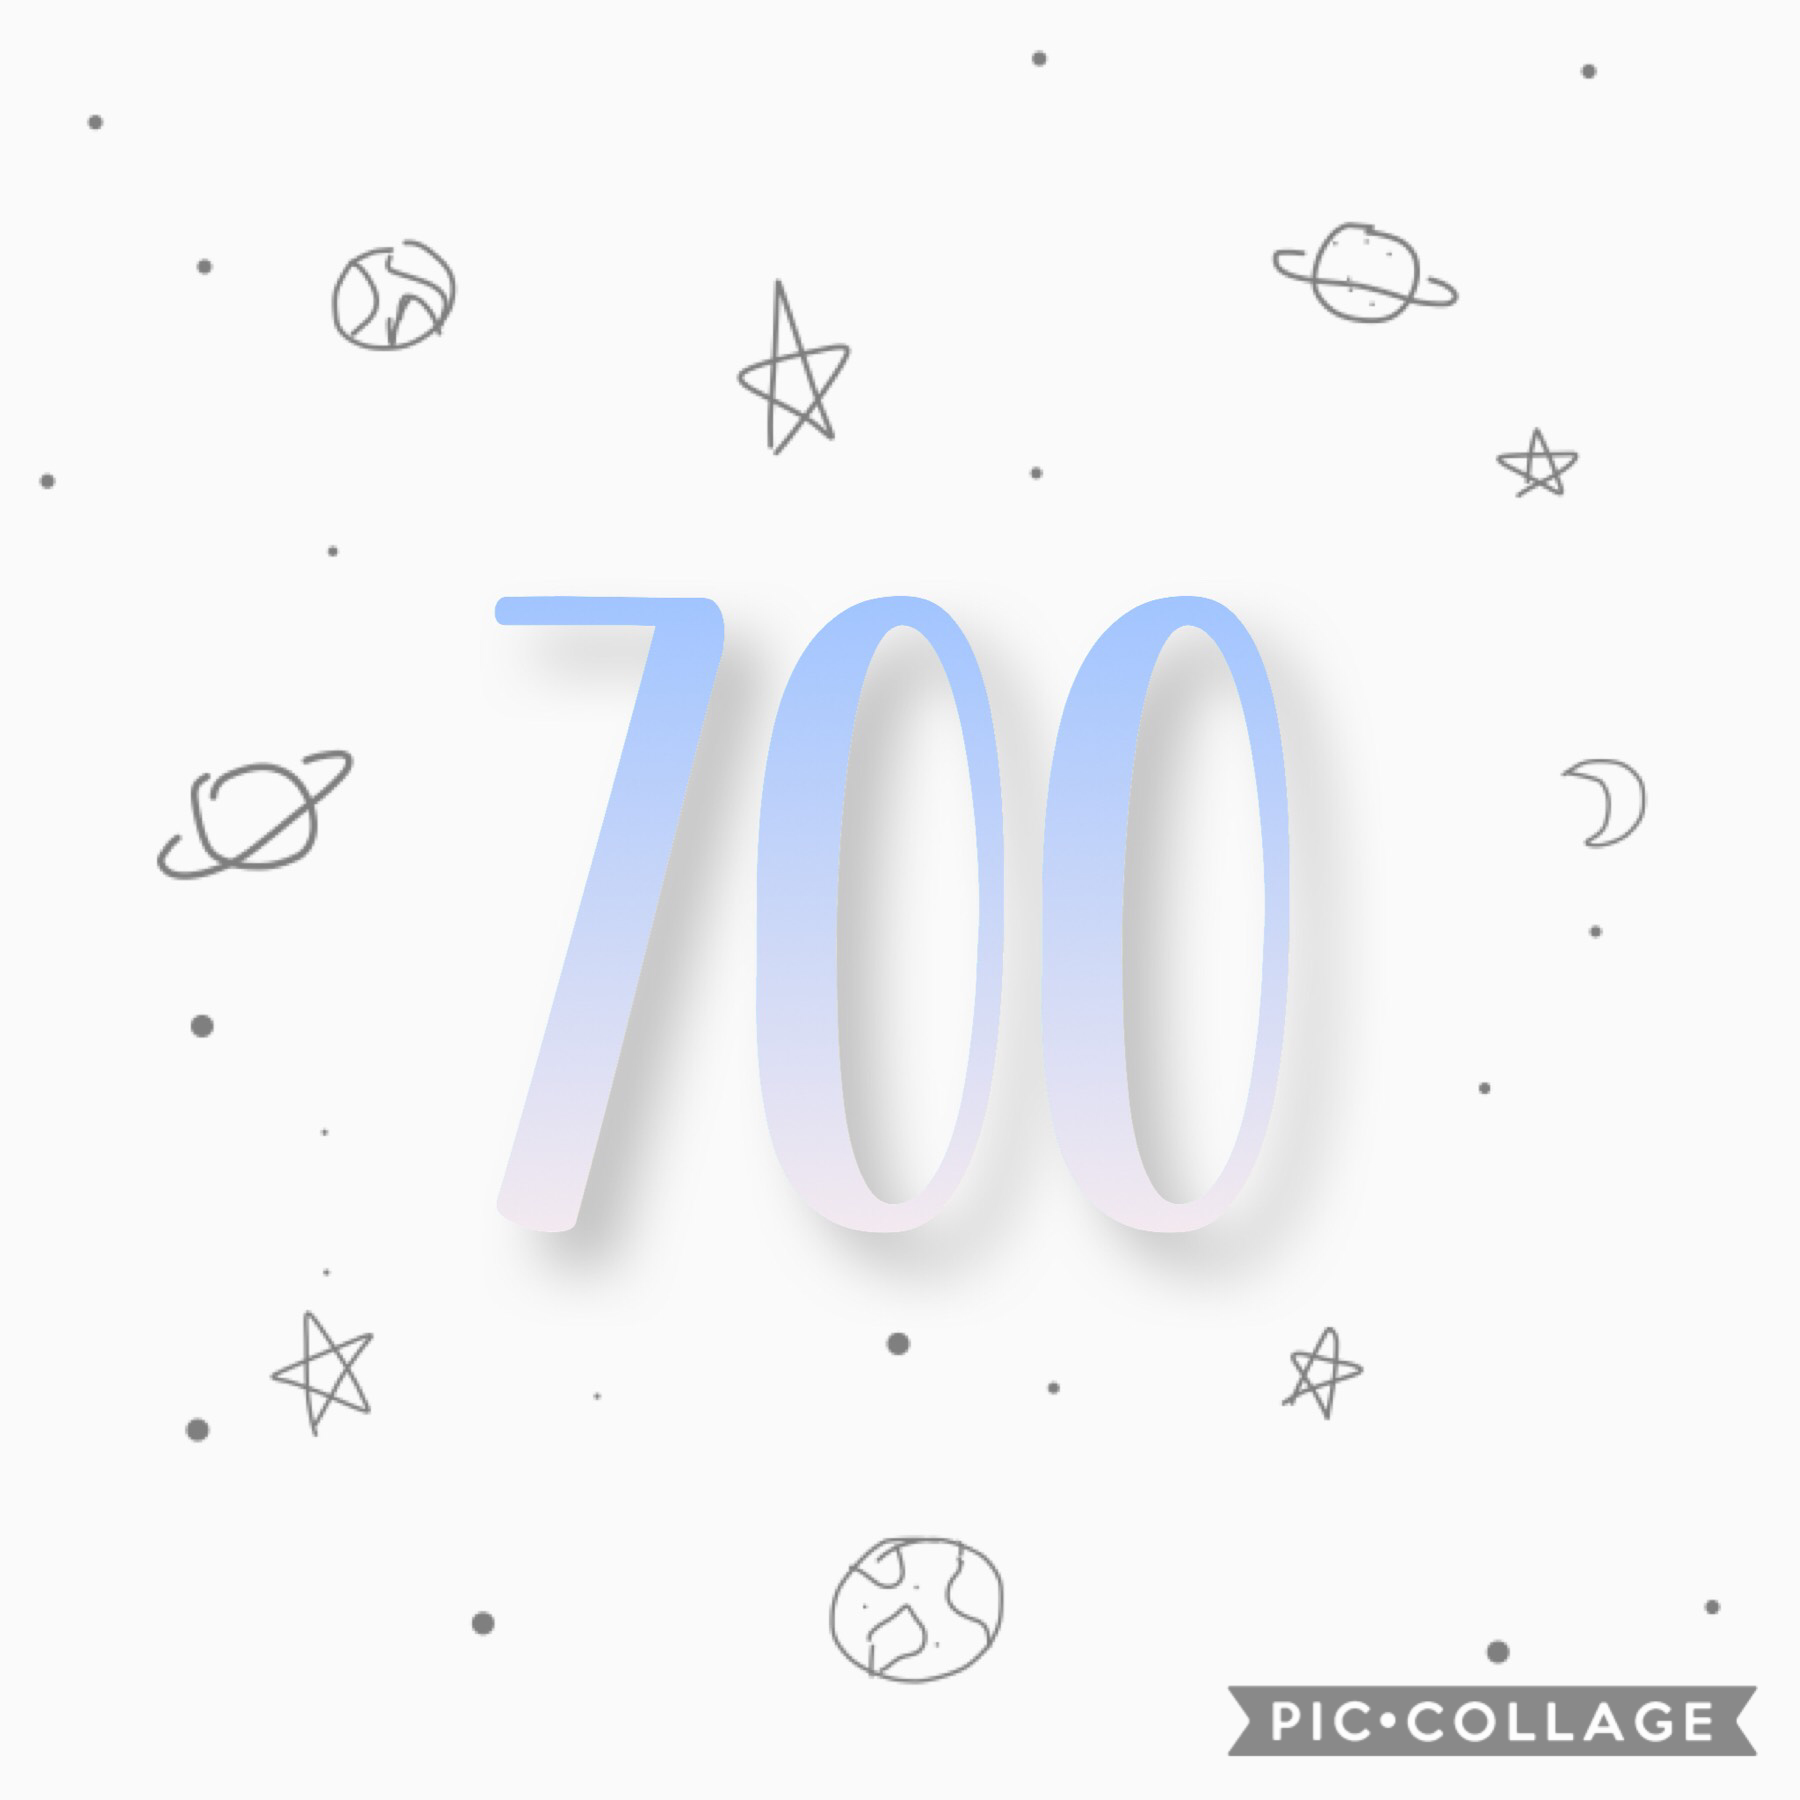 TAP
OMG WE HIT 700 FOLLOWERS!!! 
Sorry about those random doodles I did there 😂
IM SO HAPPY I NEVER THOUGHT I WOULD GET THIS FAR!

2nd November 2018